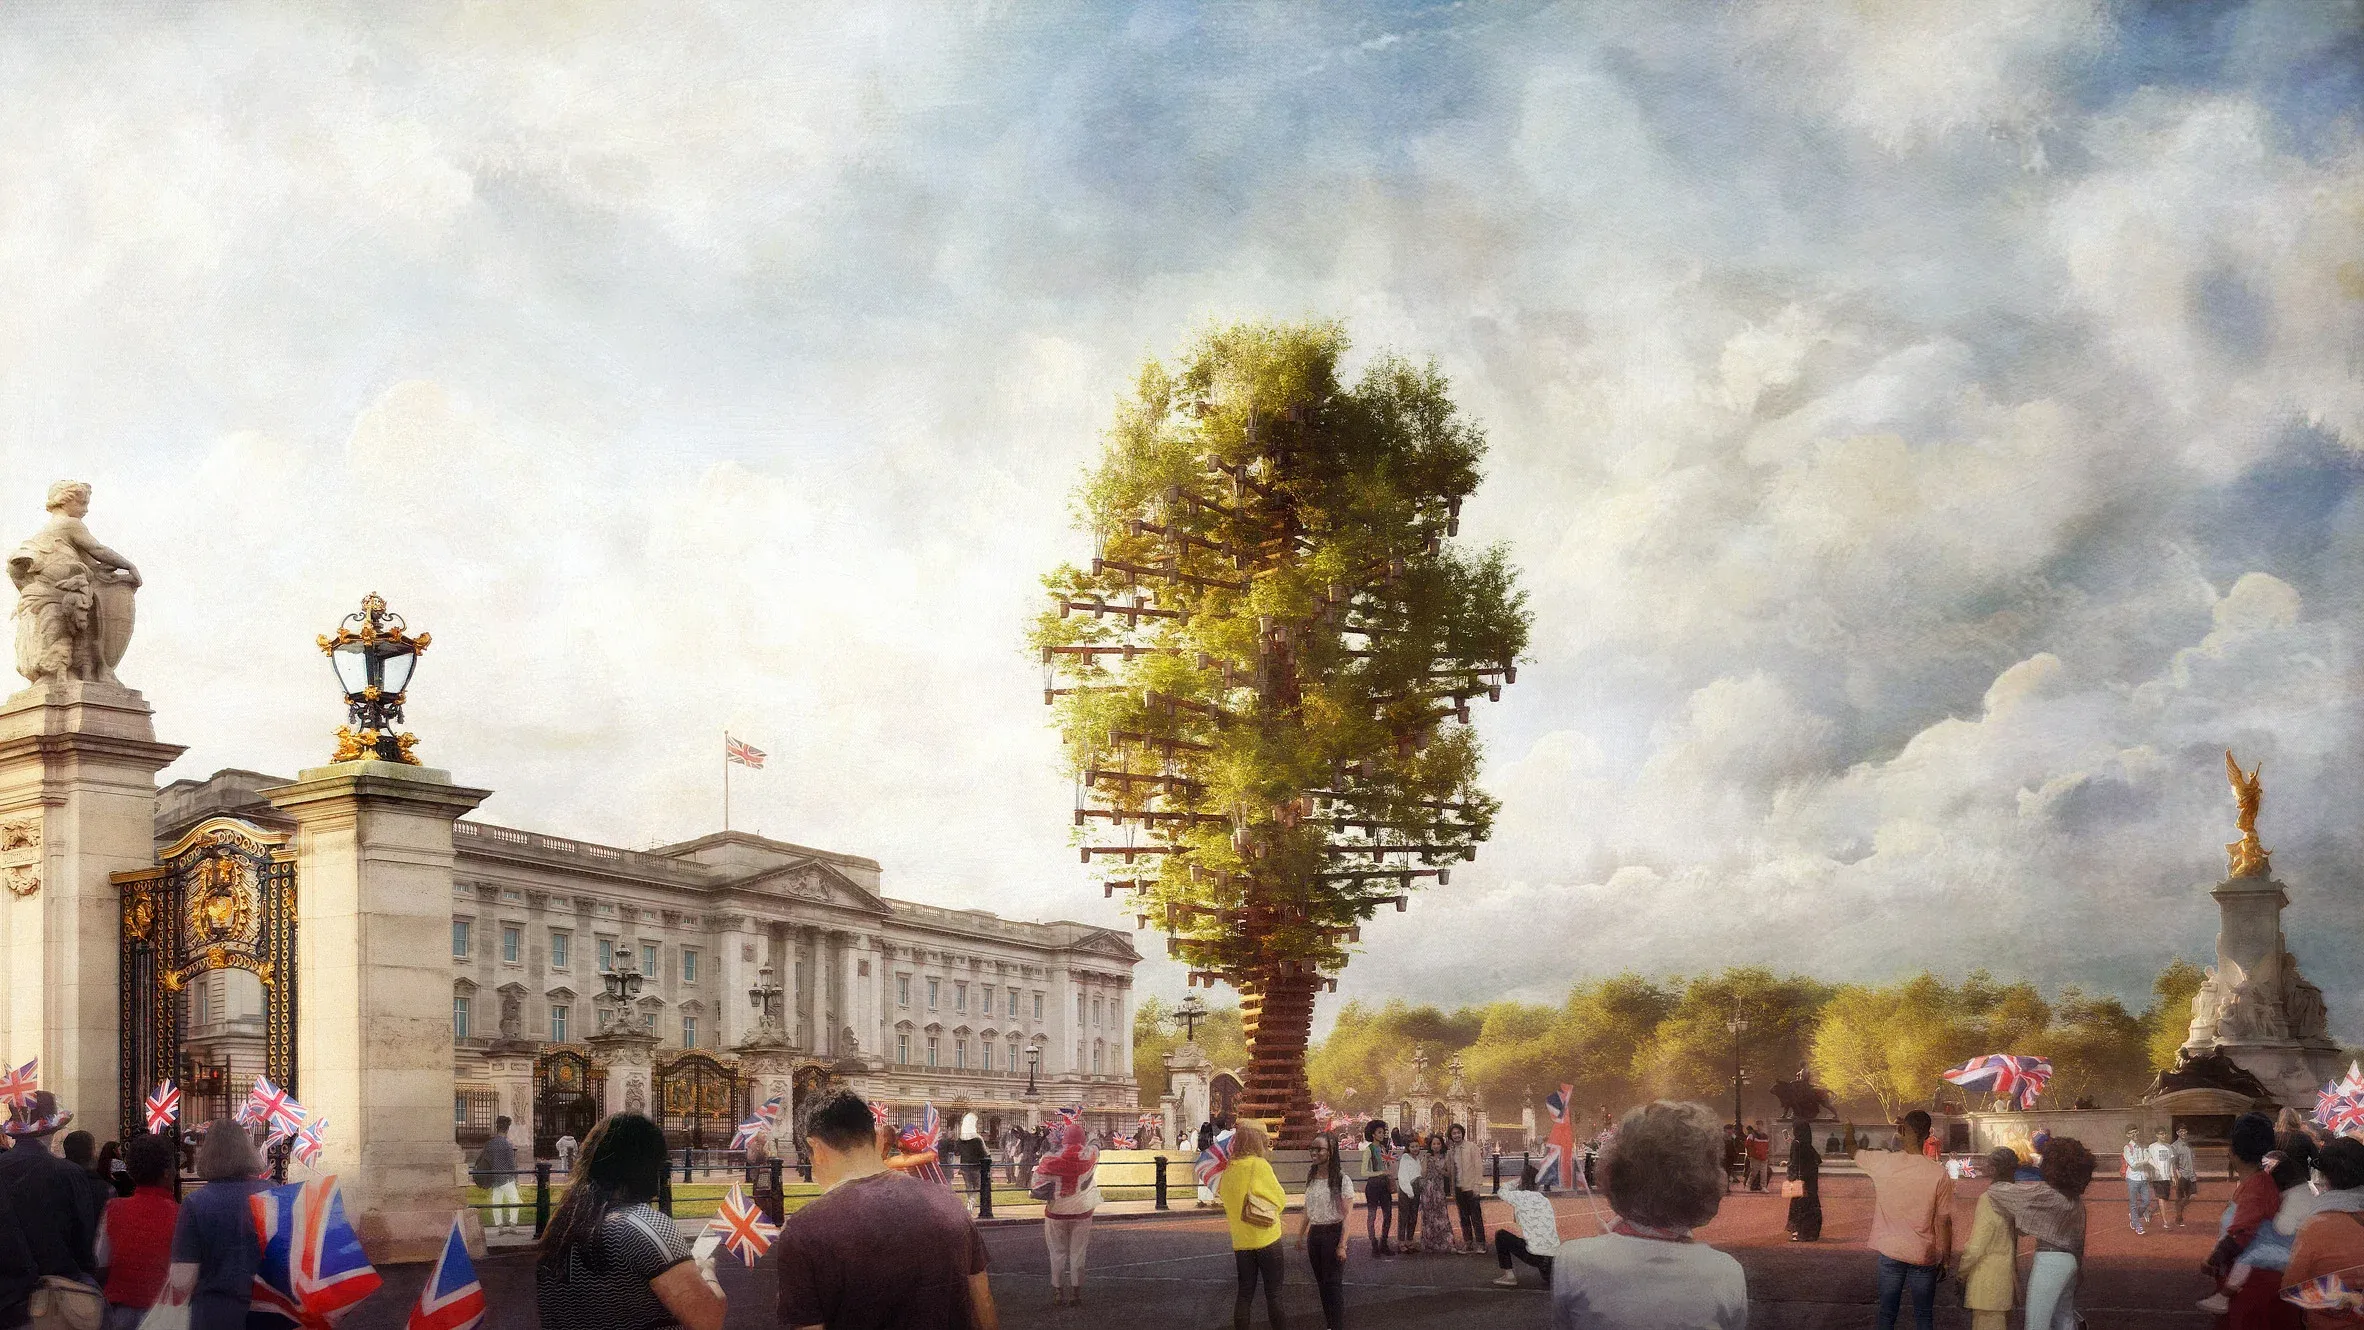 Thomas Heatherwick Designs Sculpture Covered in 350 Trees for Buckingham Palace